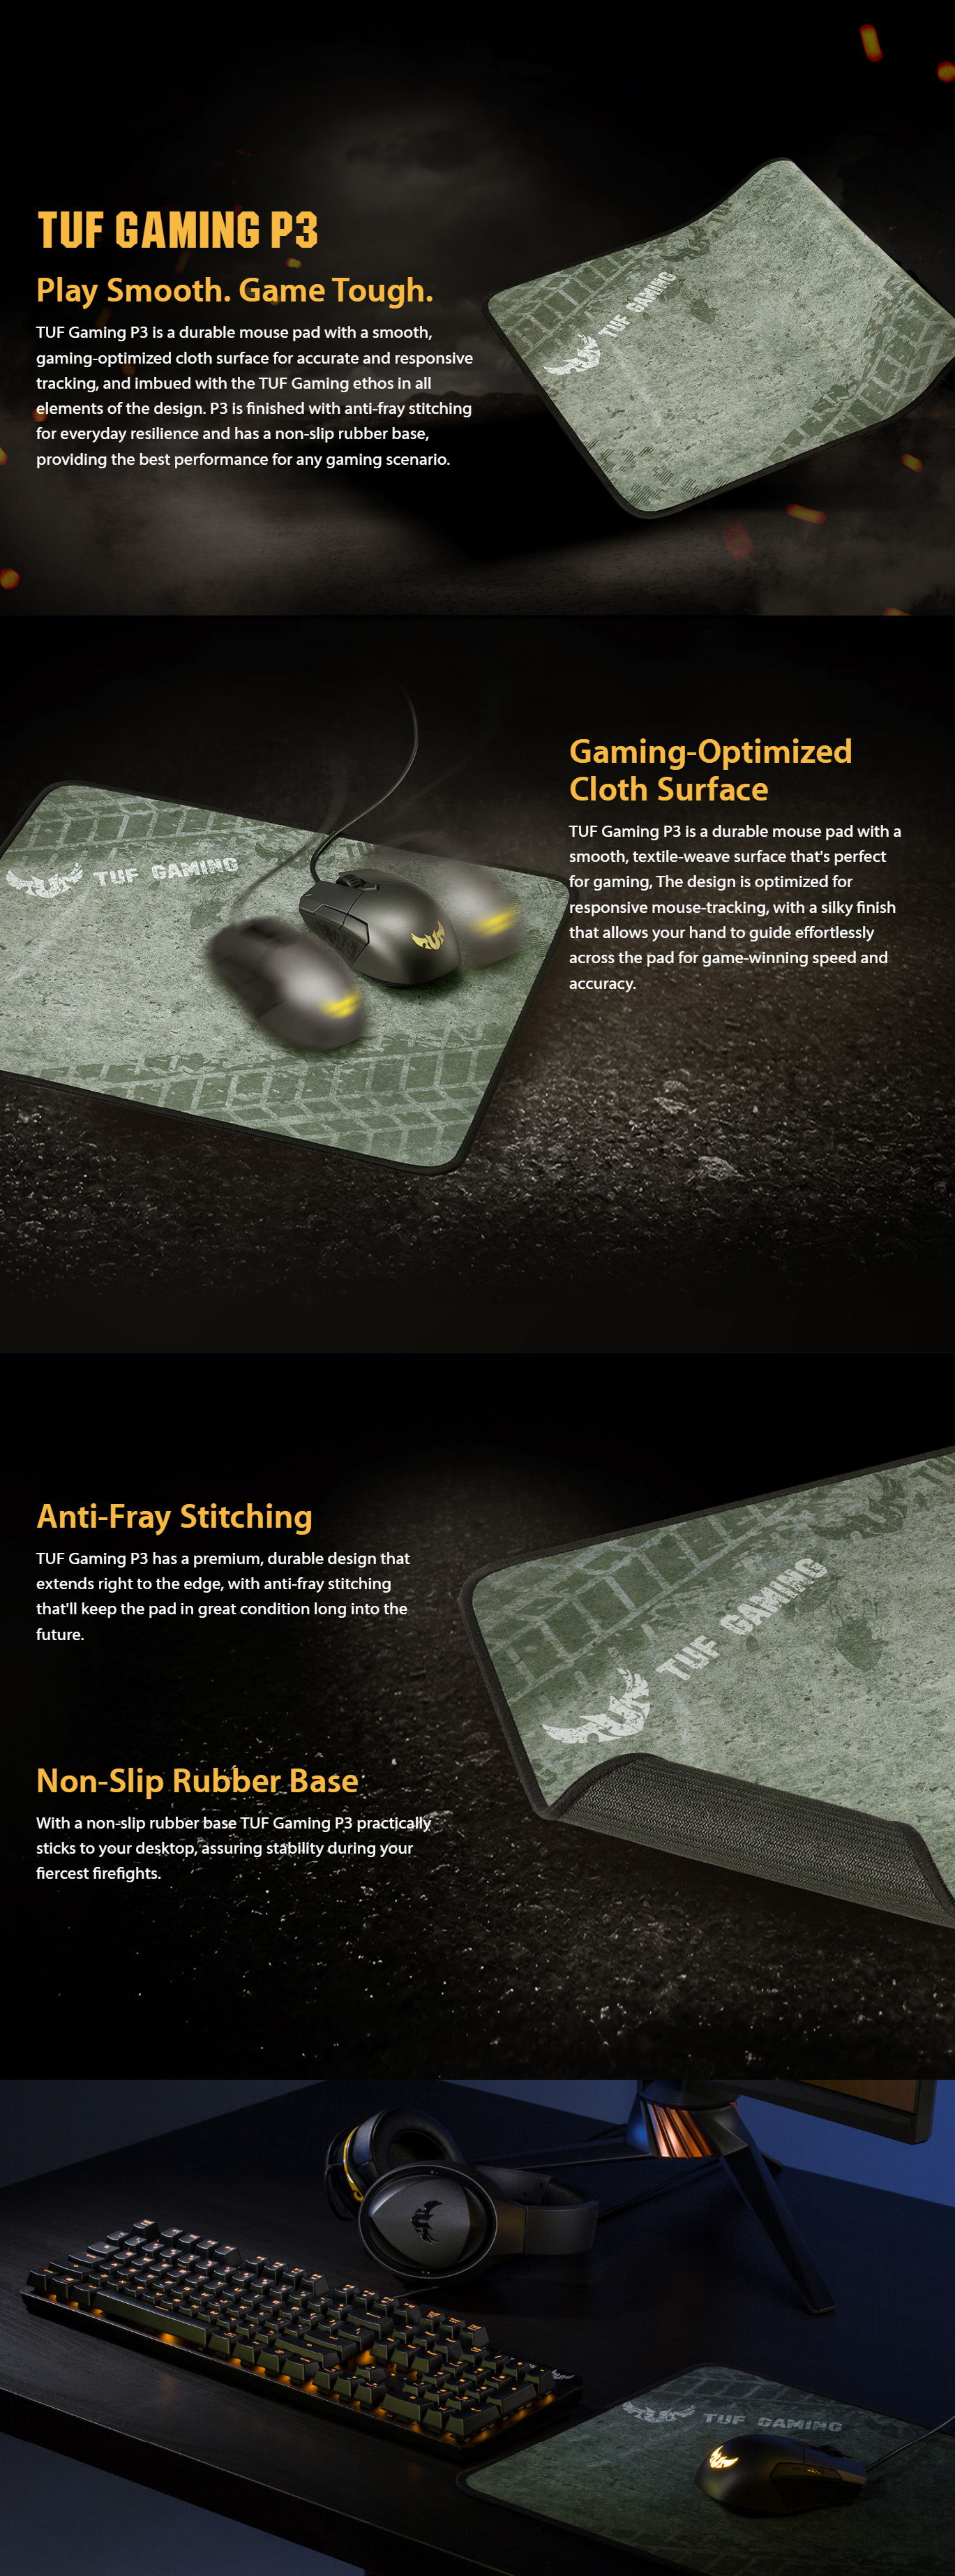 Mouse-Pads-Asus-TUF-Gaming-P3-Cloth-Mouse-Pad-1